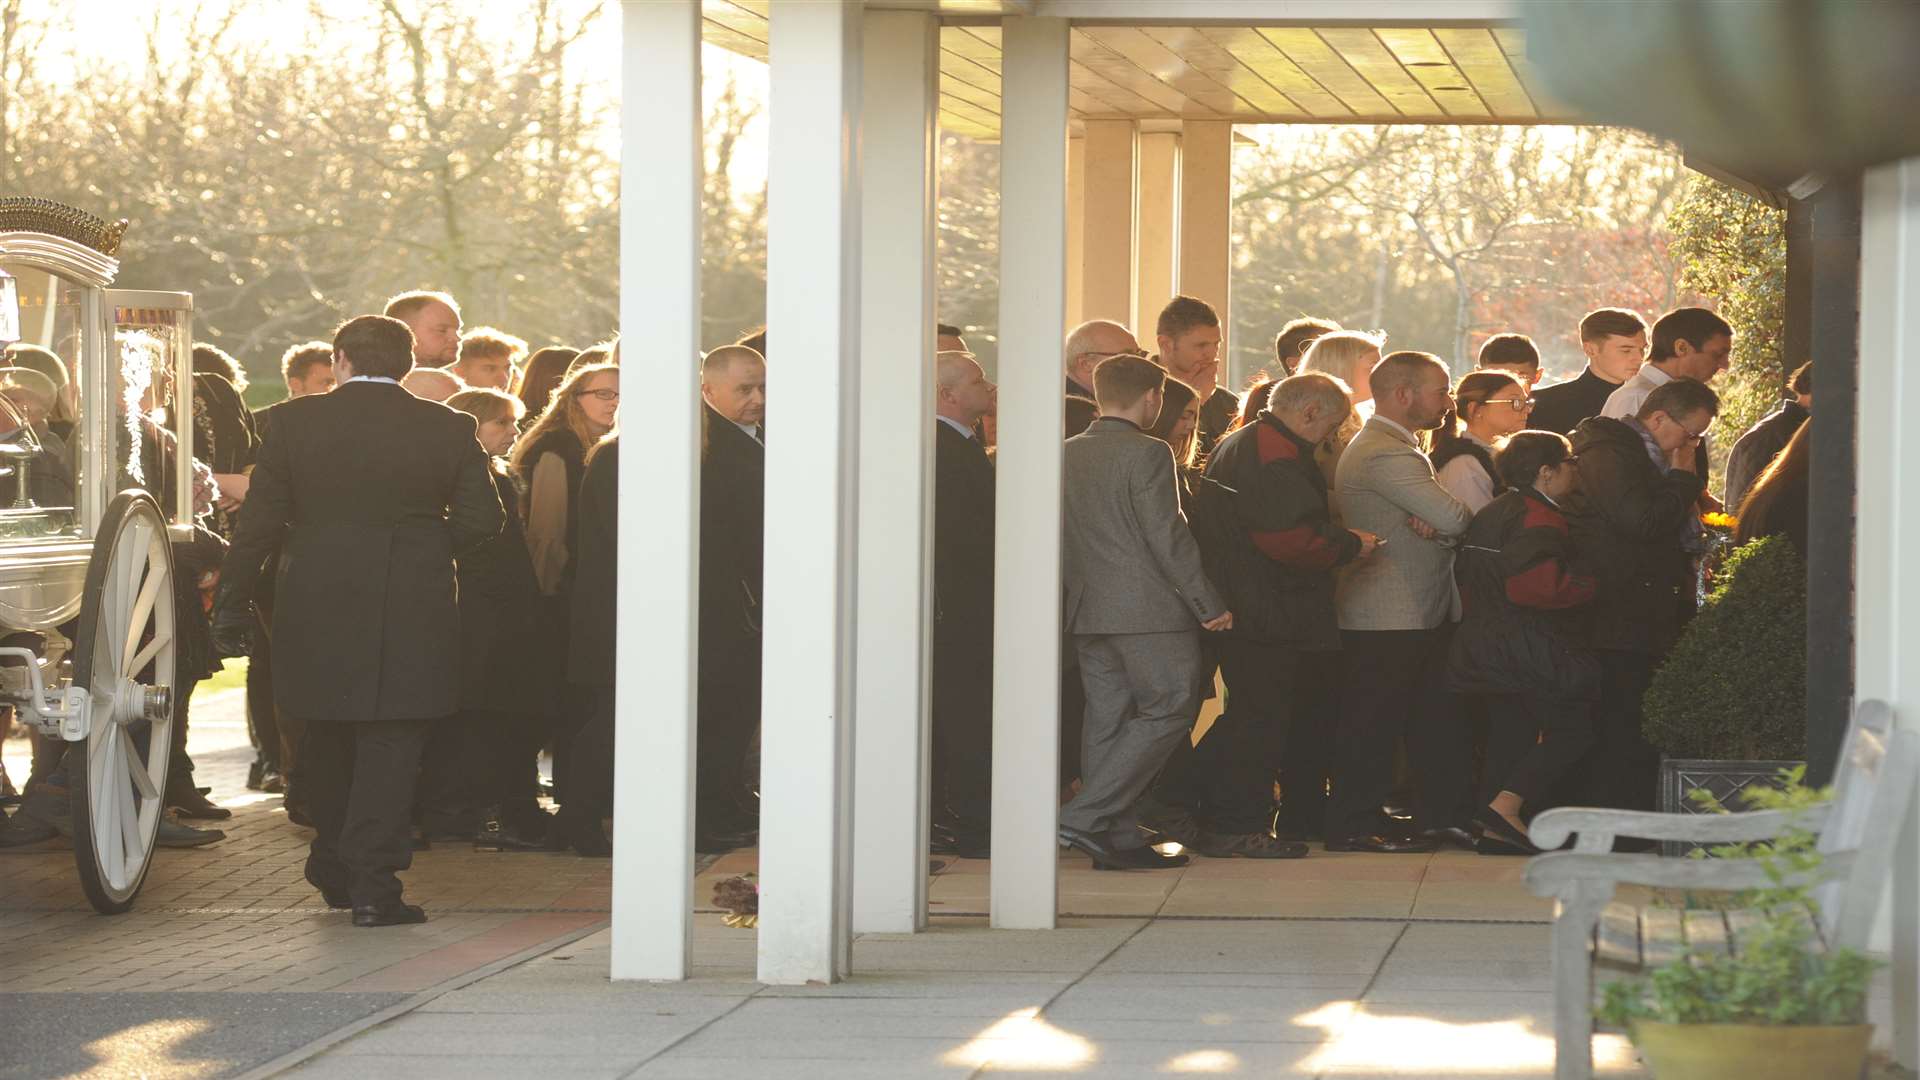 Mourners entering the chapel at the Garden of England Crematorium for Jessica's funeral